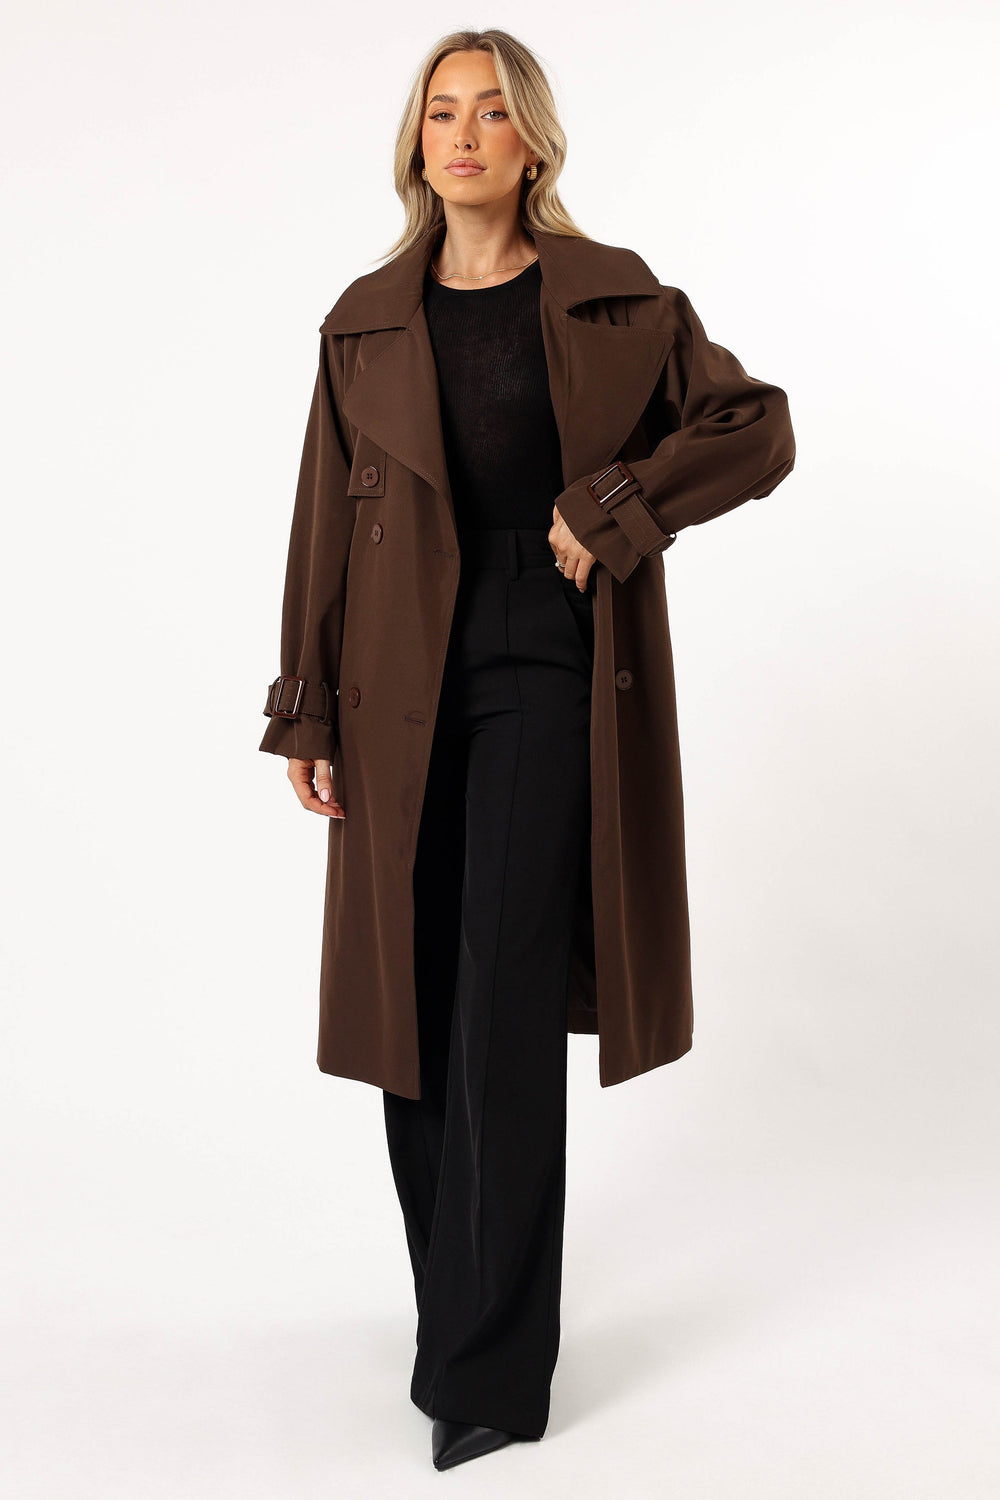 OUTERWEAR @Billy Button Front Trench Coat  - Chocolate Brown